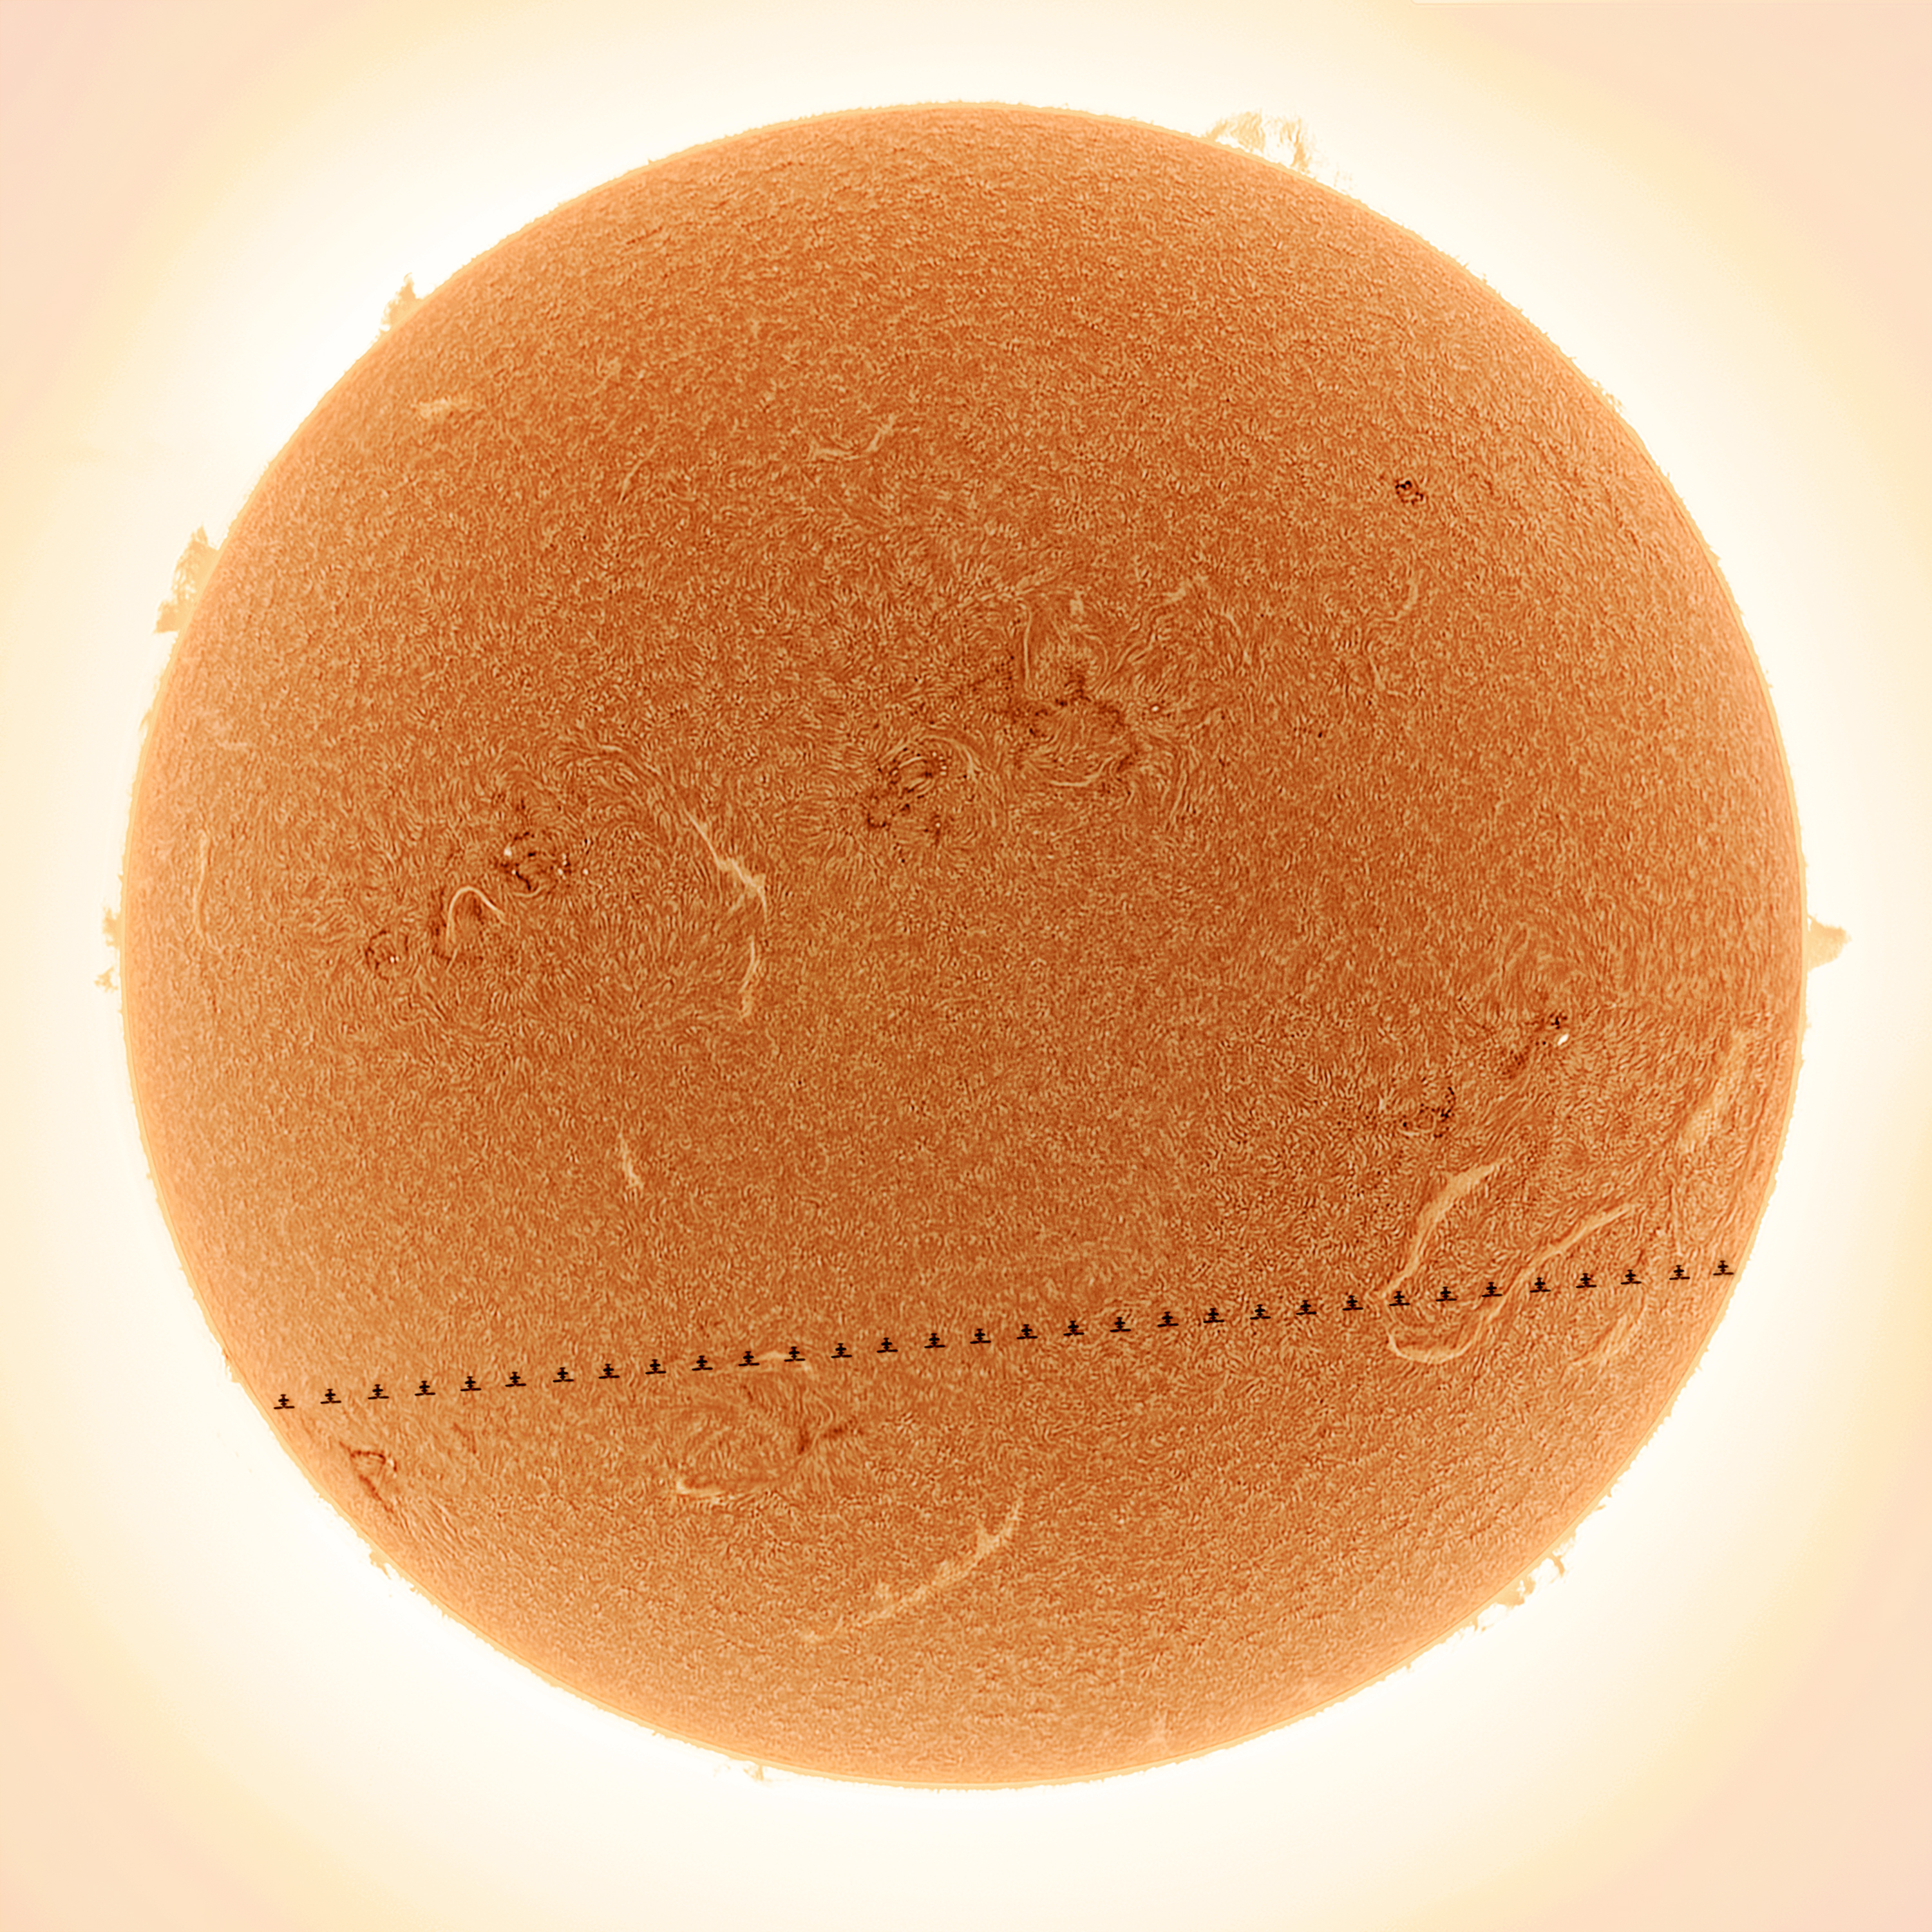 China Space Station Transits Active Sun - The Sun photographed showing the transit of the China Space Station (CSS). The image of the CSS was produced by selecting the nine clearest photos from captured video frames.